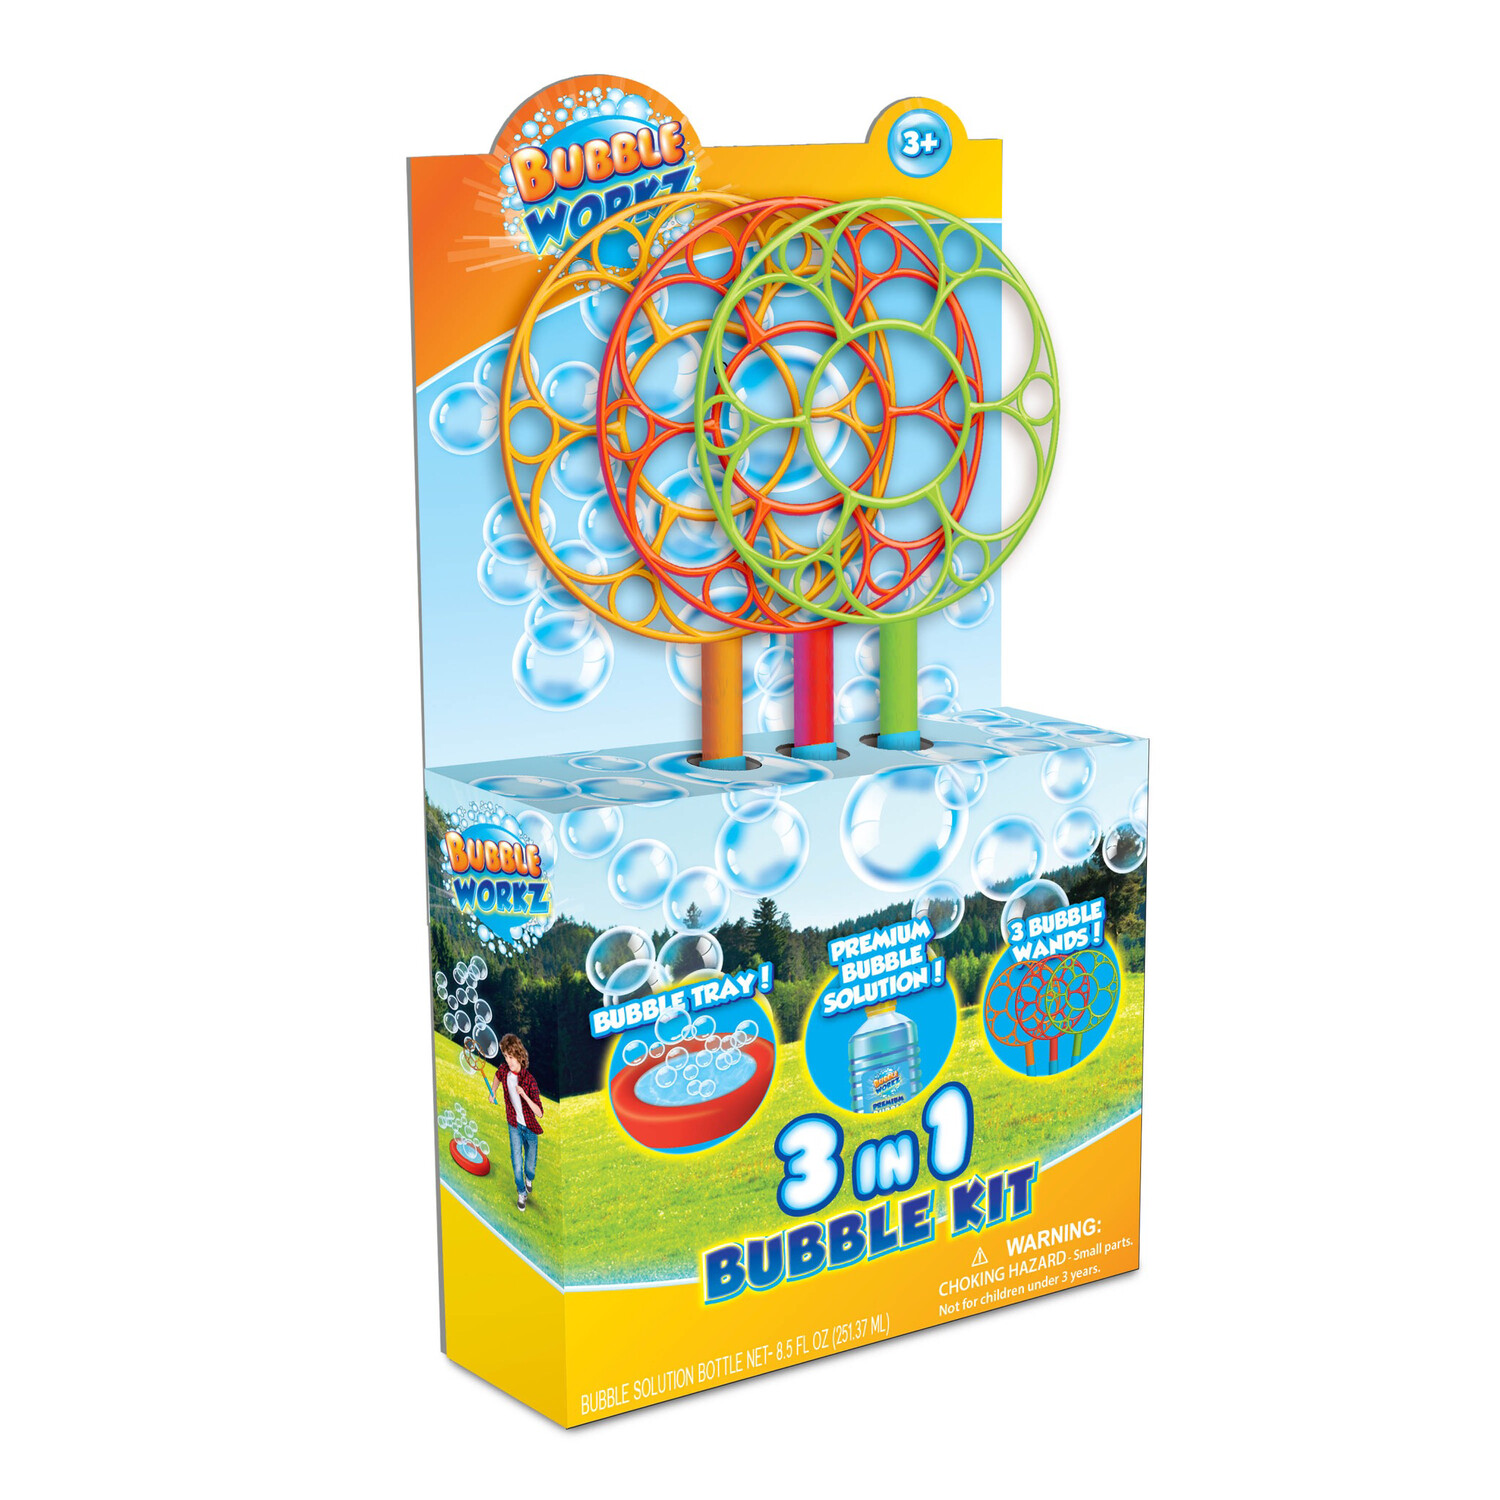 3 in 1 Bubble Wand Kit